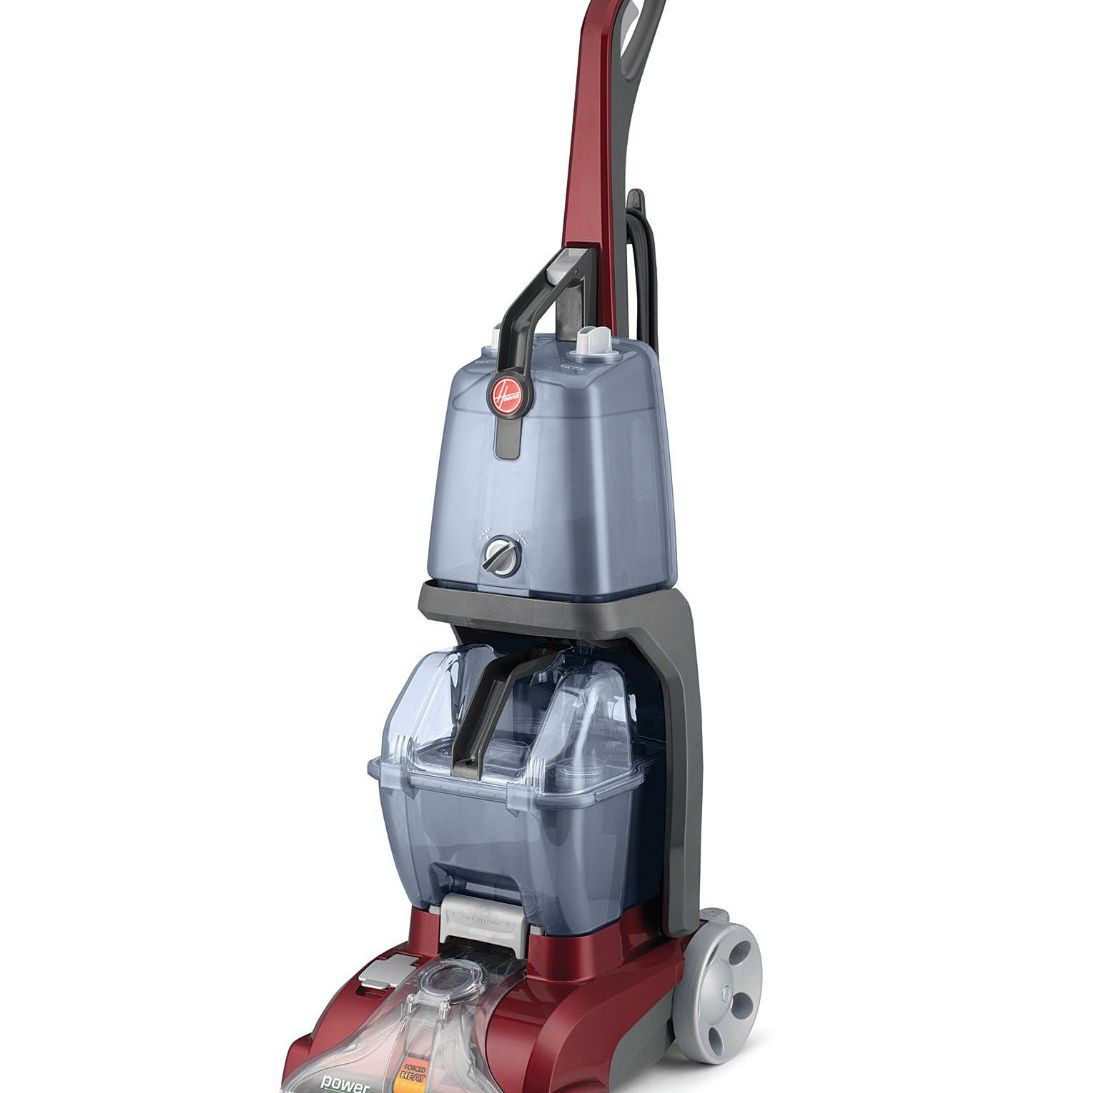 18 Unique Hardwood Floor Cleaning Machine Reviews 2024 free download hardwood floor cleaning machine reviews of the 9 best carpet cleaners to buy in 2018 pertaining to best overall hoover fh50150 carpet basics power scrub deluxe carpet cleaner